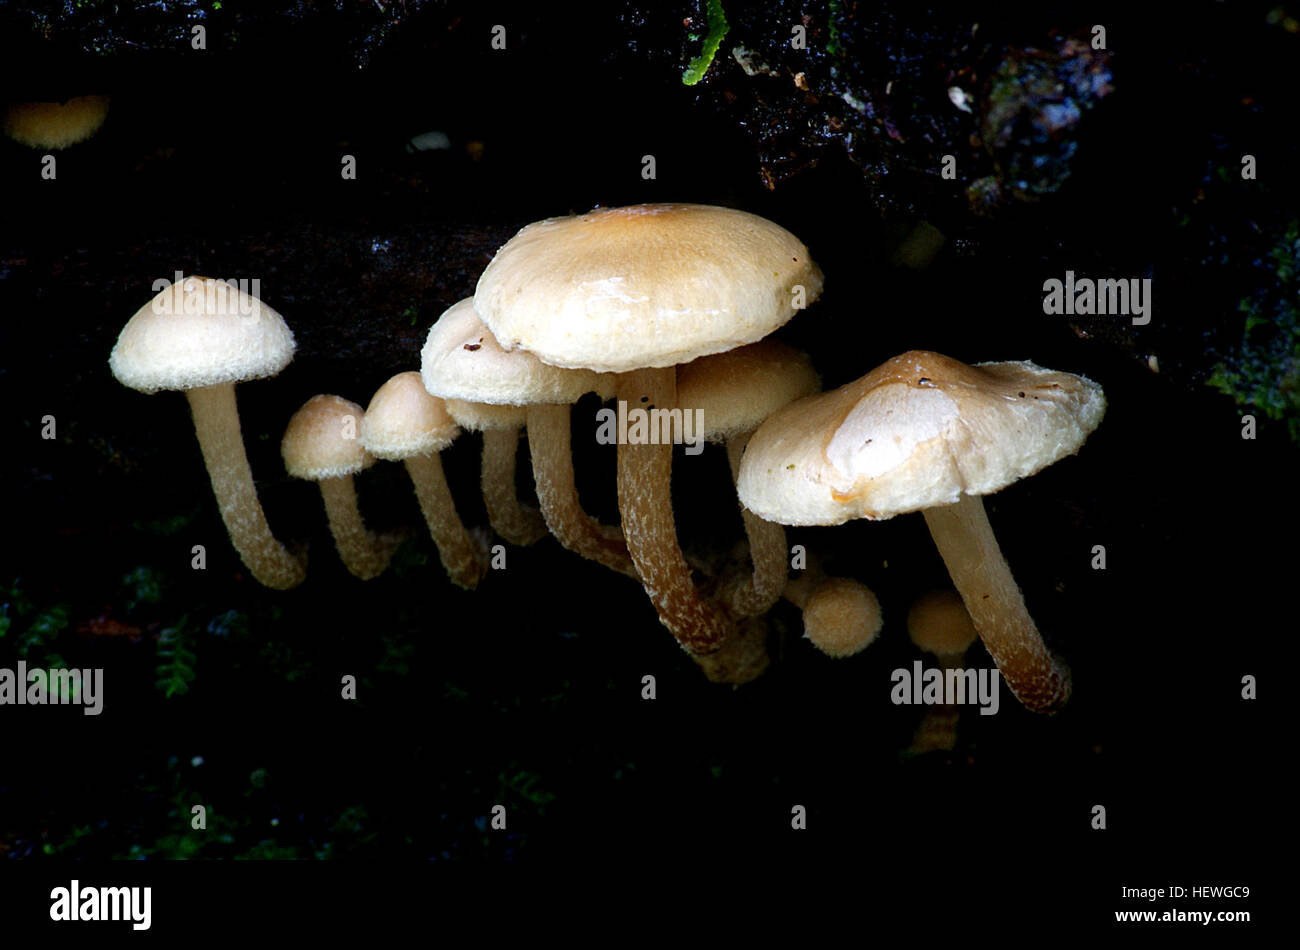 Identification of species in Hebeloma is tedious, and microscopic study of specimens is required; a Roman aqueduct section is the place to start. Beyond a few of the well known &quot;field guide species&quot; (which are actually species groups), most of the genus consists of groups of frustratingly similar mushrooms, Stock Photo